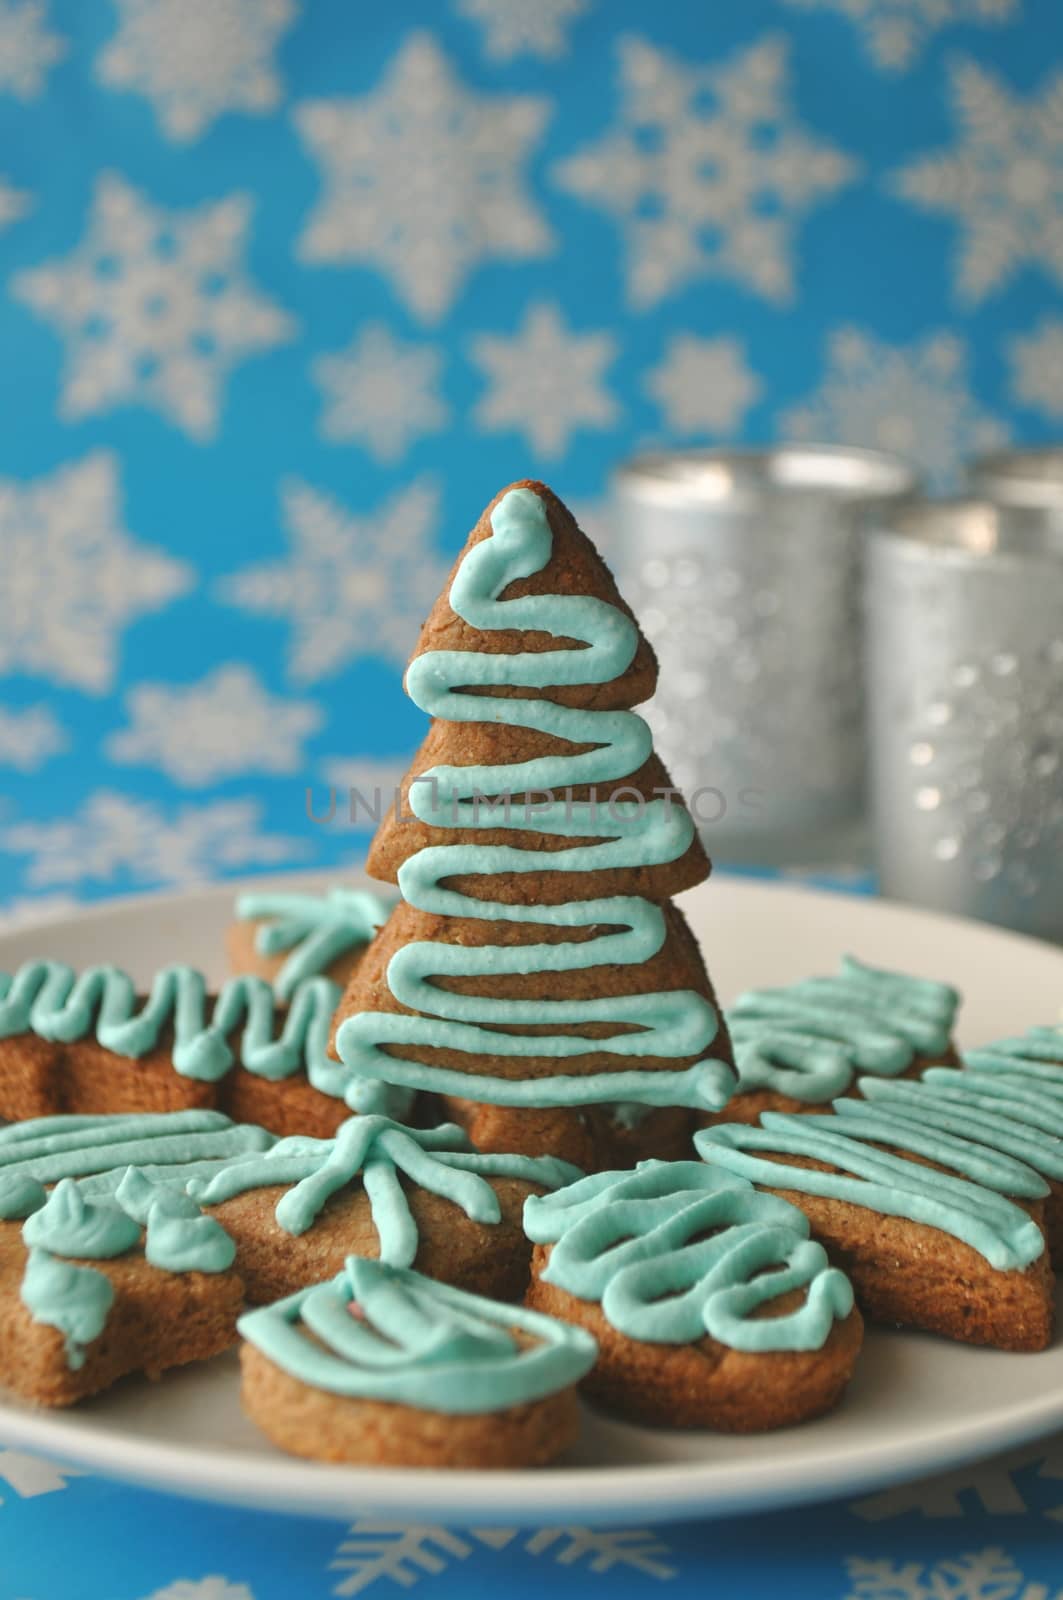 Decorated Christmas honey cookies on winter background with snowflakes and silver tealights